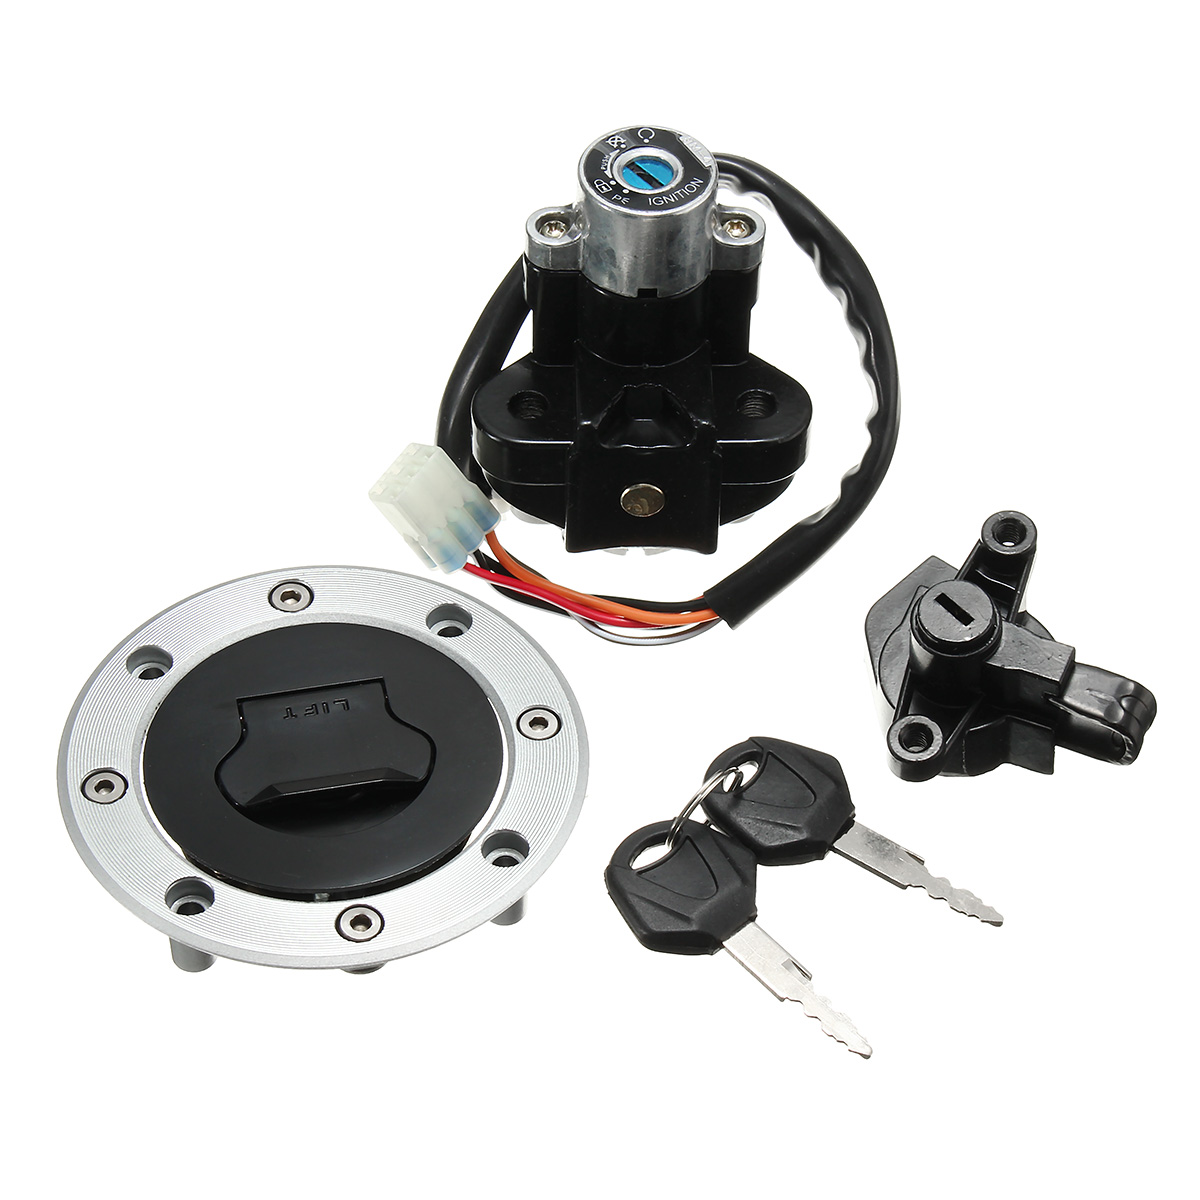 

Ignition Switch Fuel Gas Cap Cover Lock Set For Suzuki GSF600 GSF1200